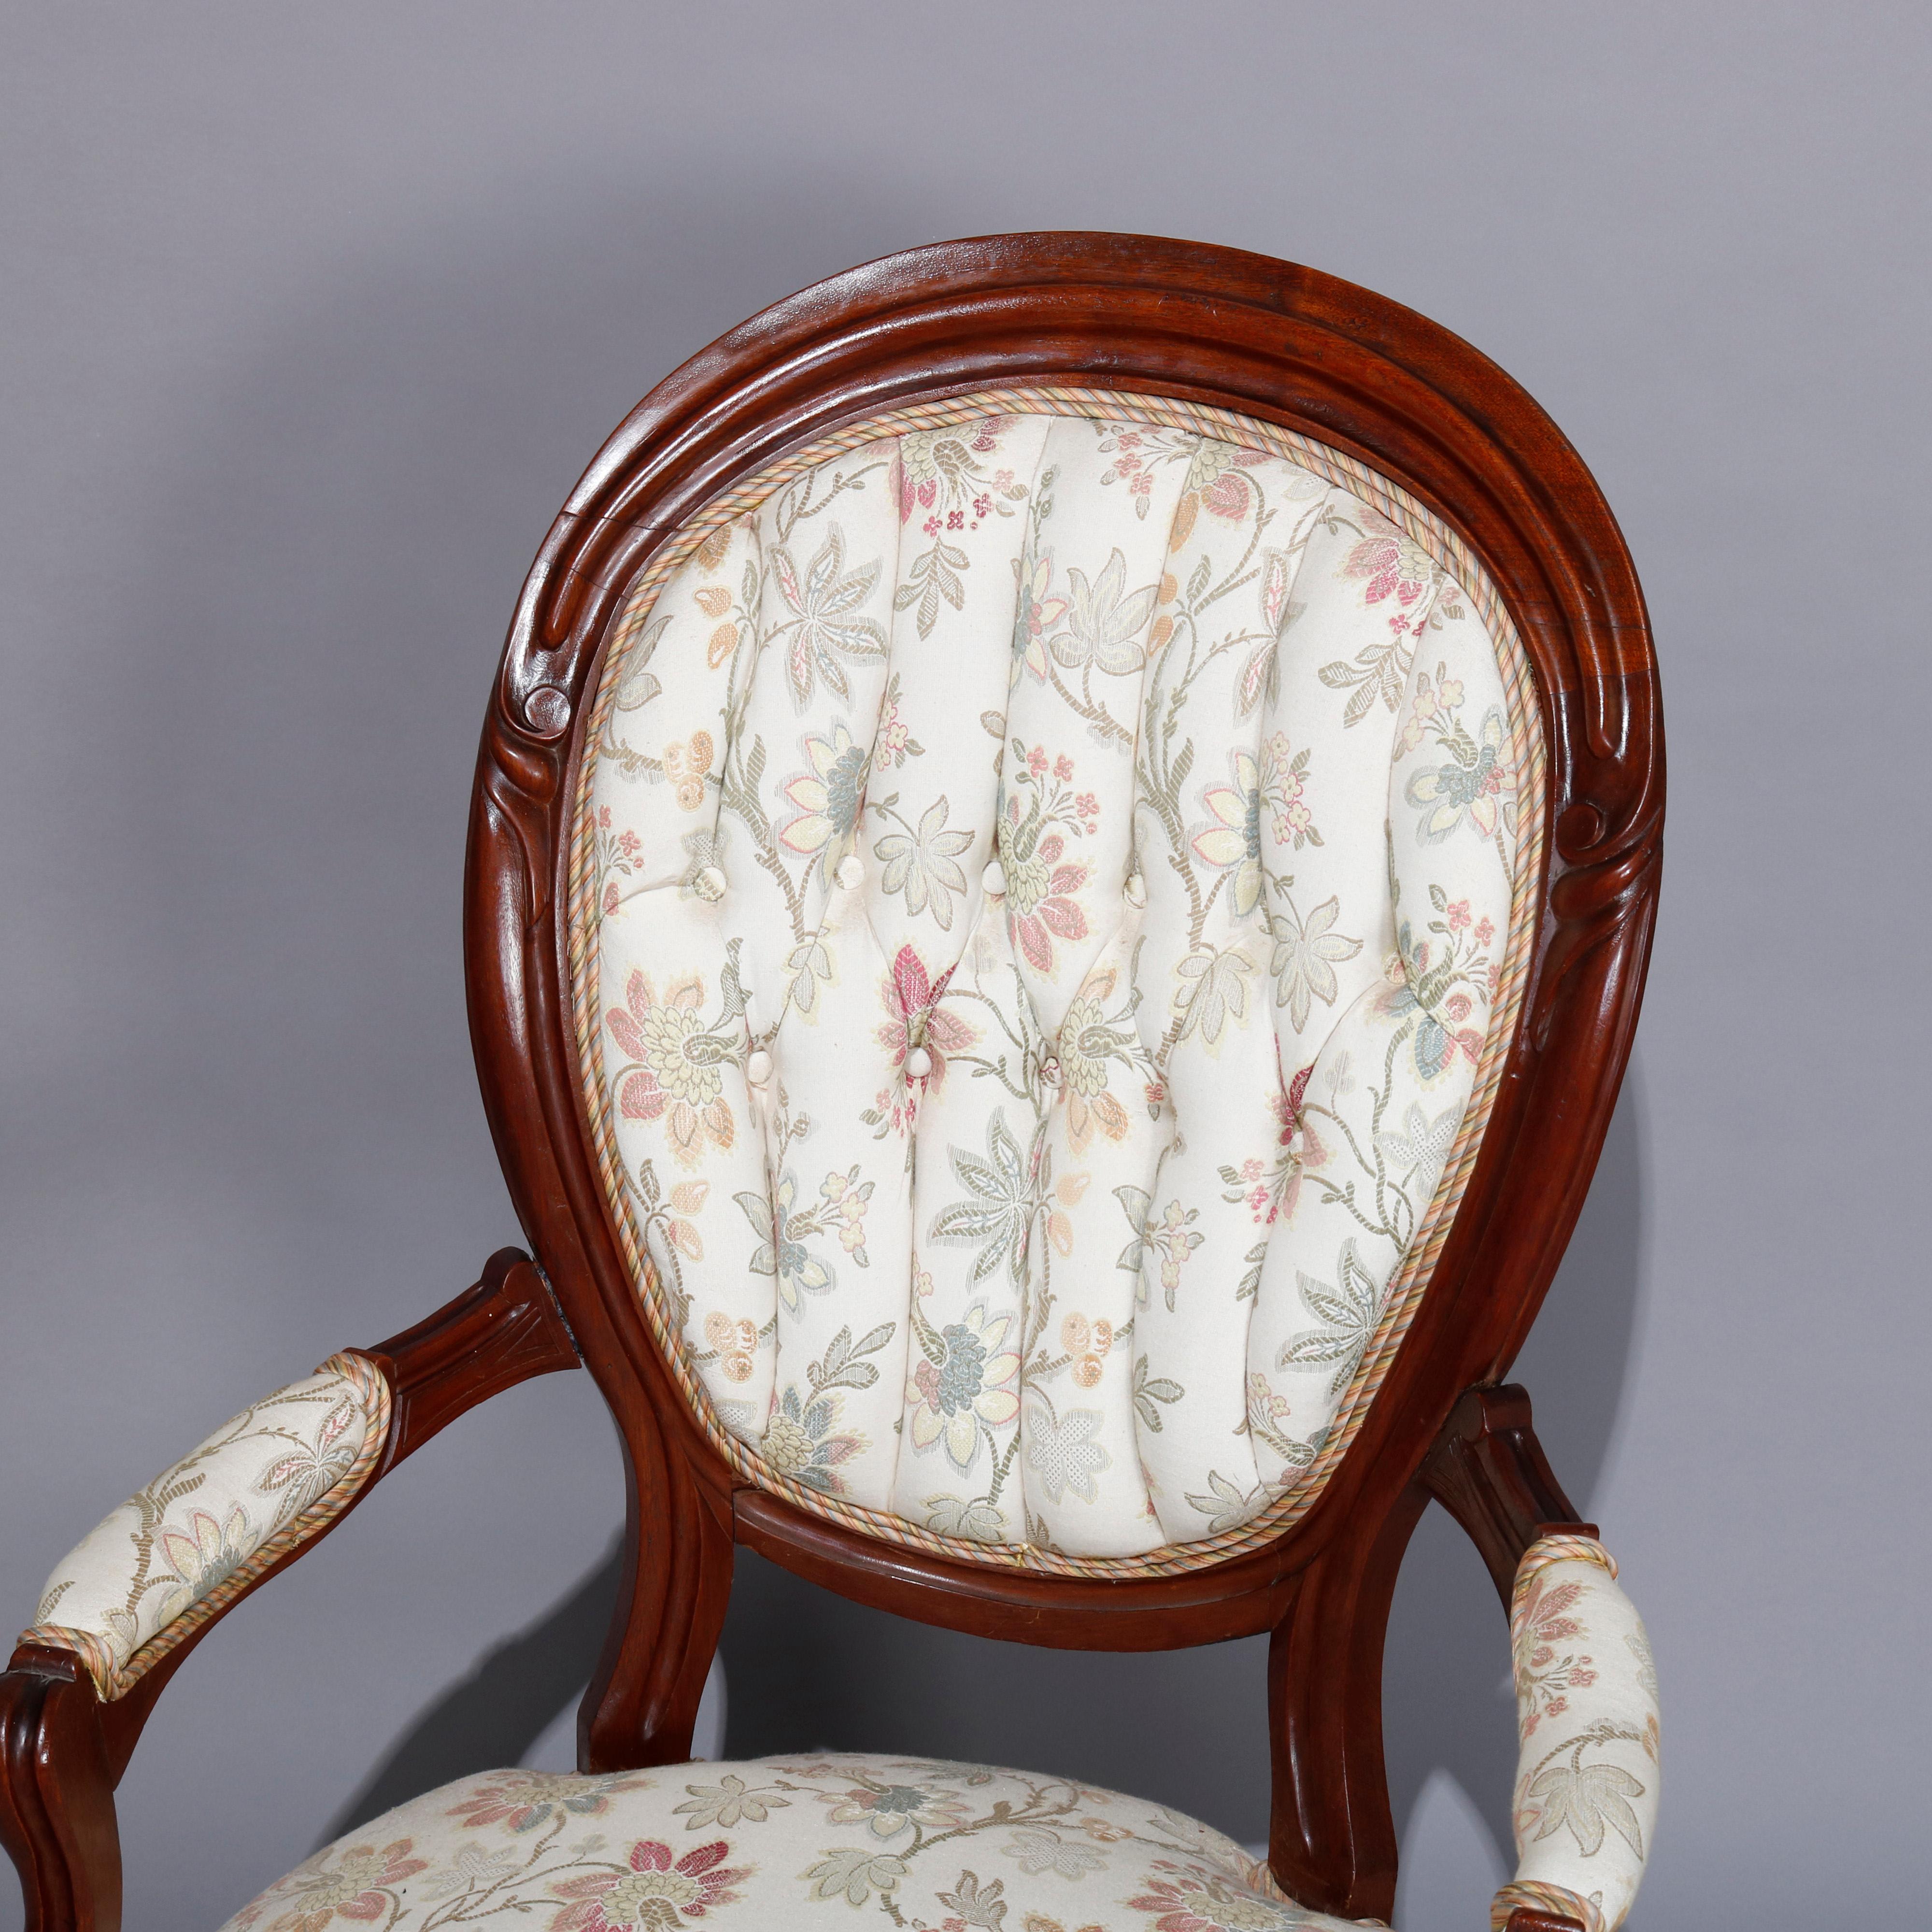 19th Century Antique Victorian Carved Walnut Upholstered Parlor Chair Set, circa 1890